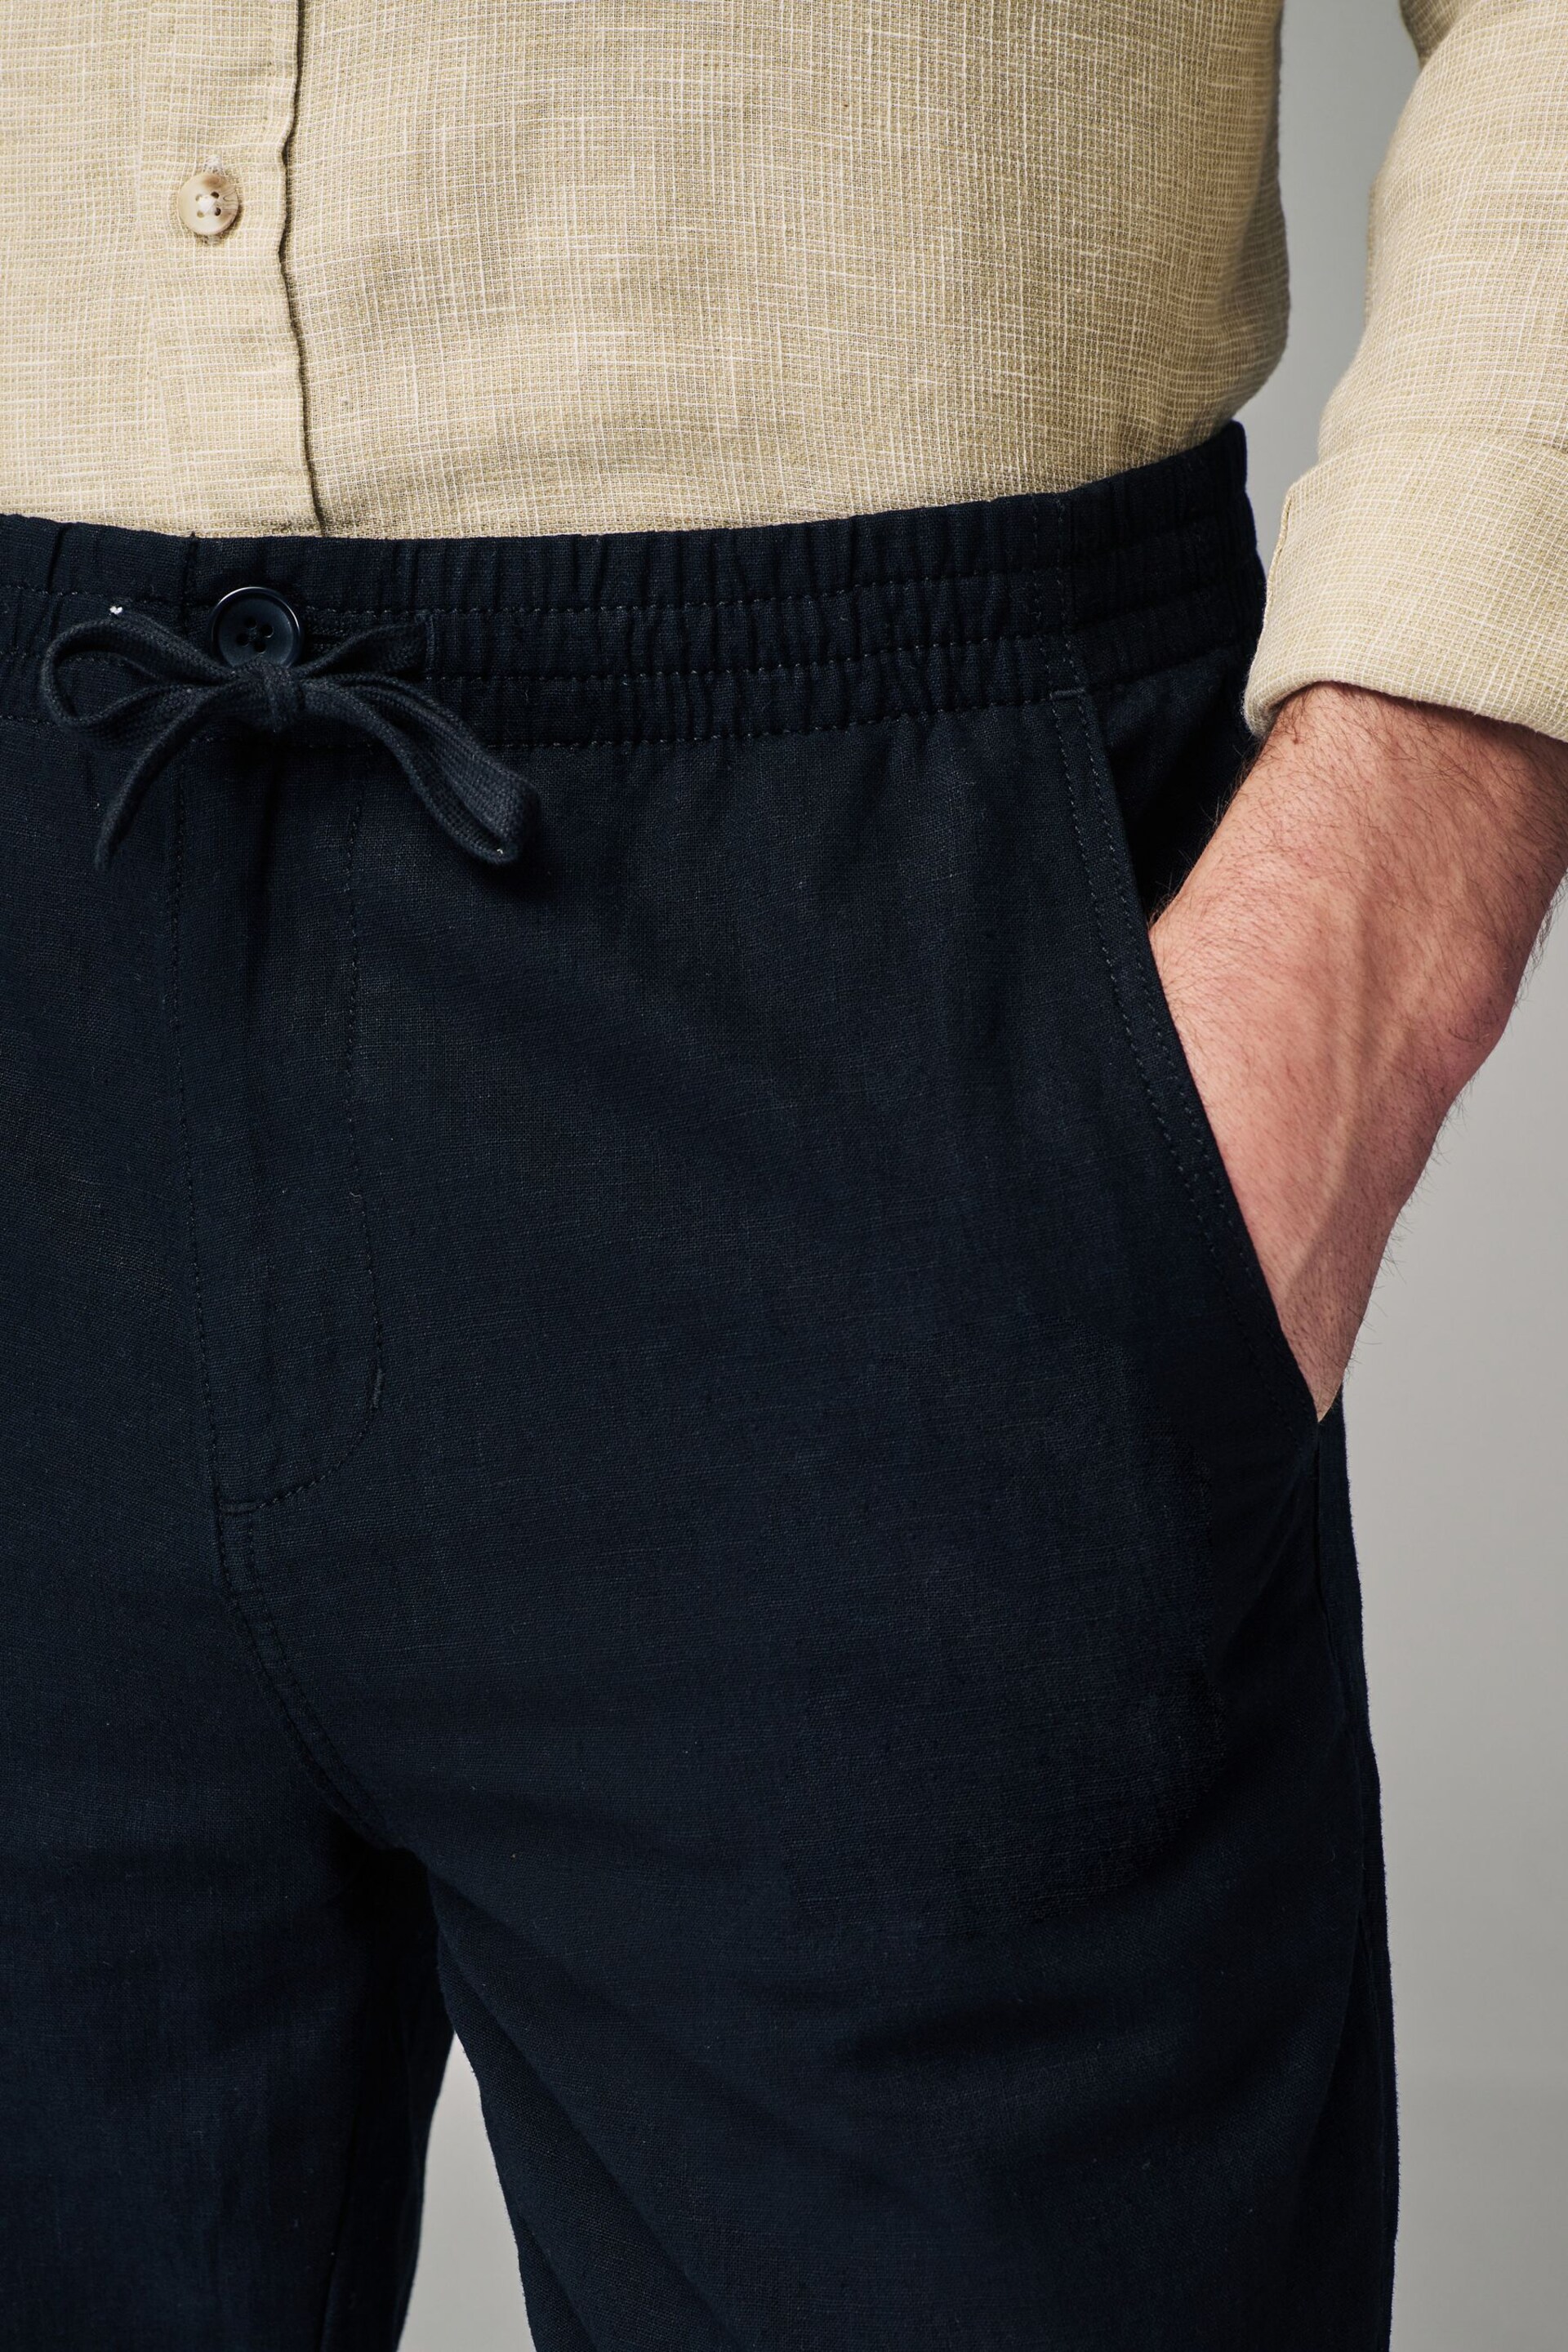 Black Slim Fit Linen Cotton Elasticated Drawstring Trousers - Image 5 of 9